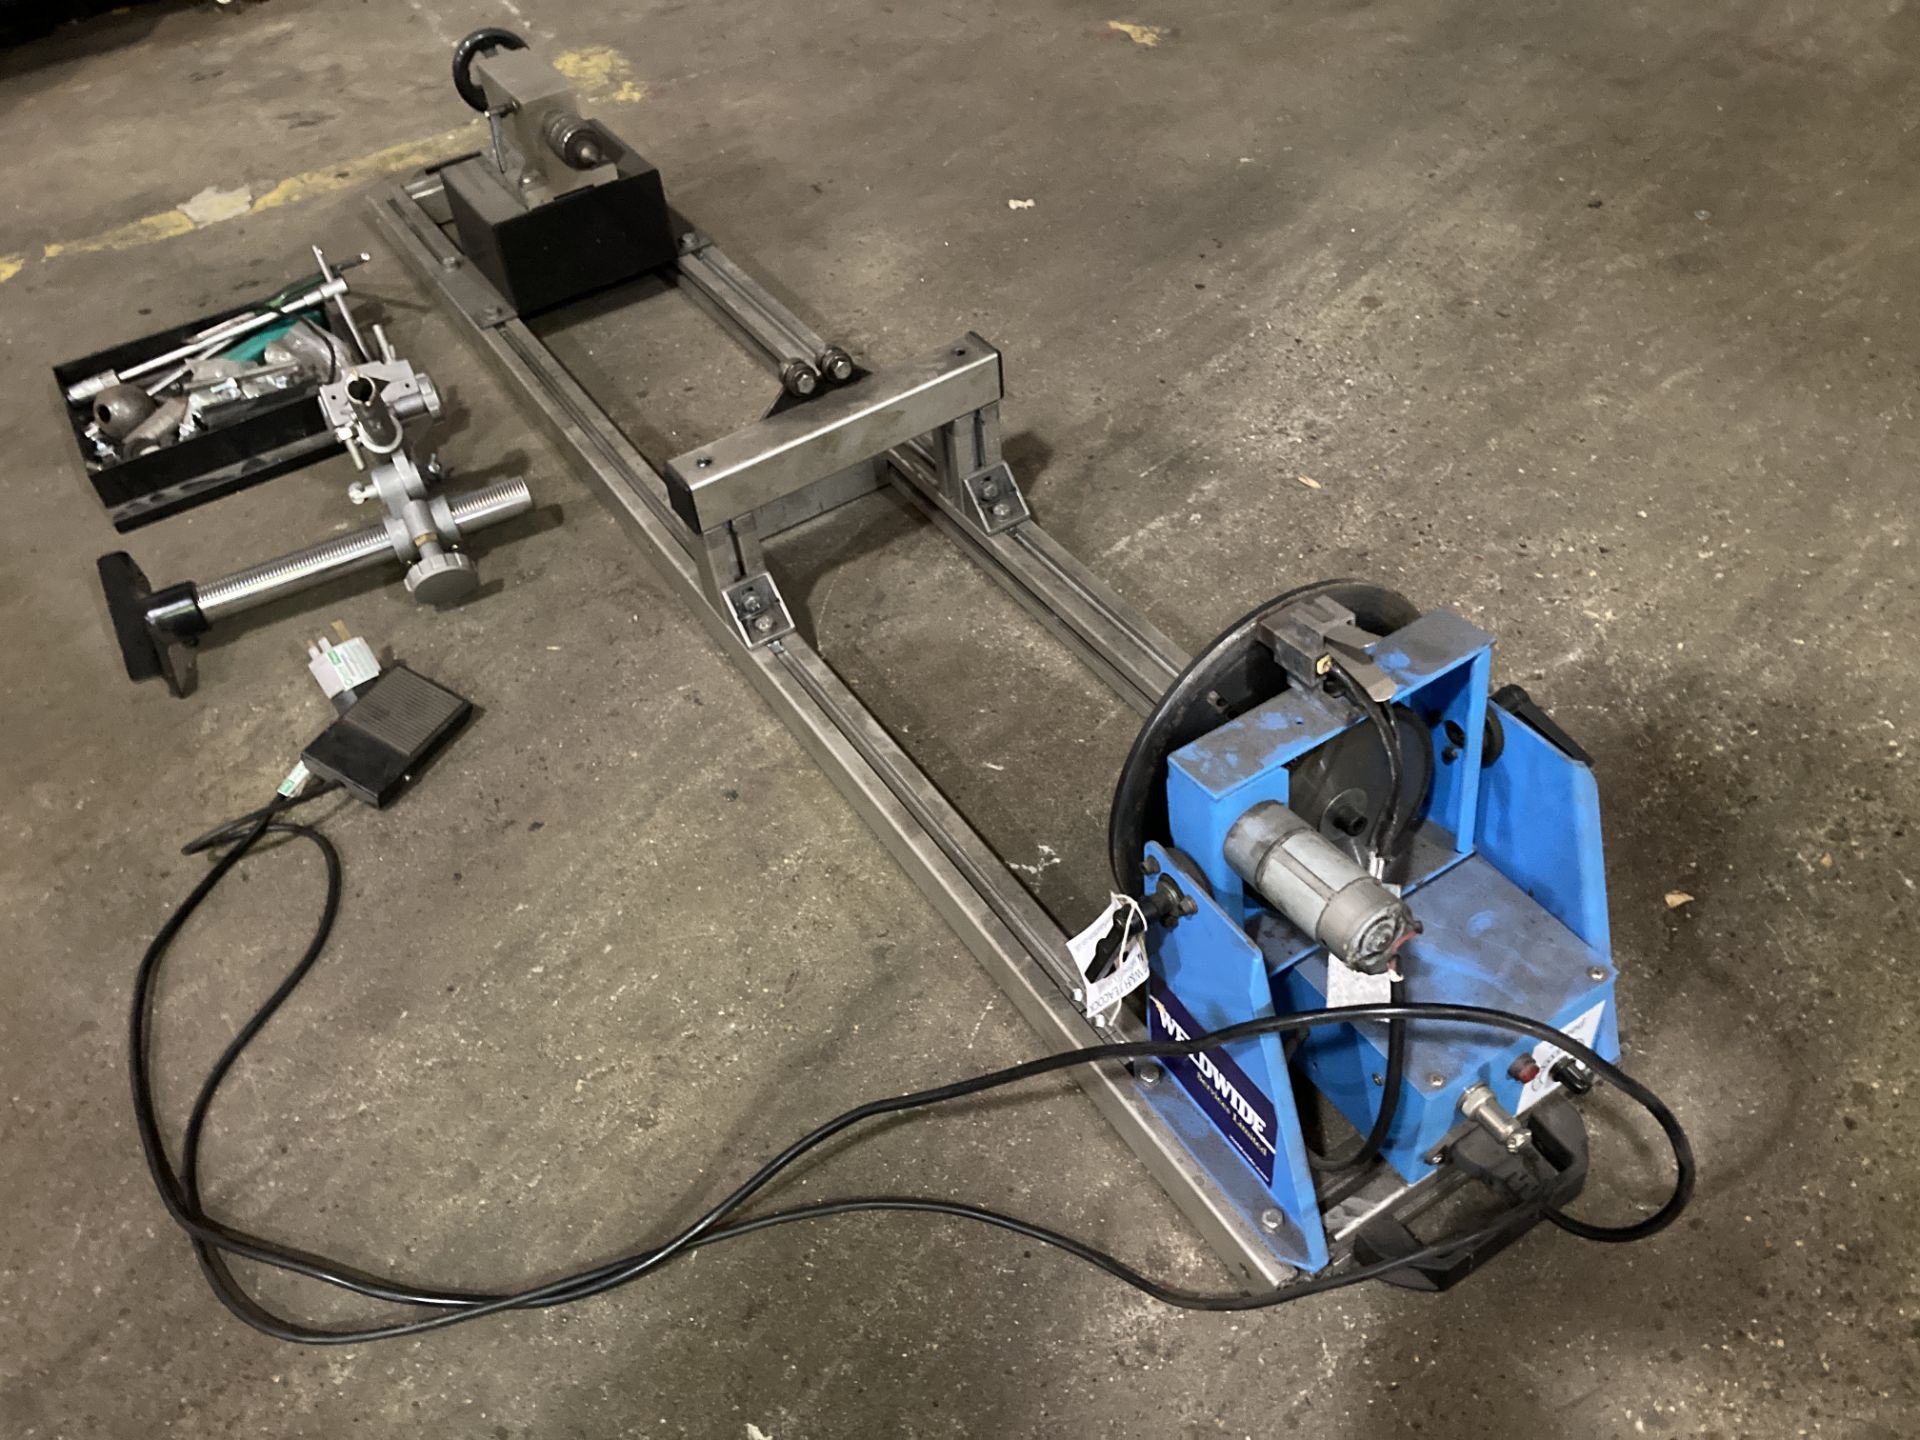 Ynuo welding rotator with foot pedal operation, single phase electric - Image 3 of 8